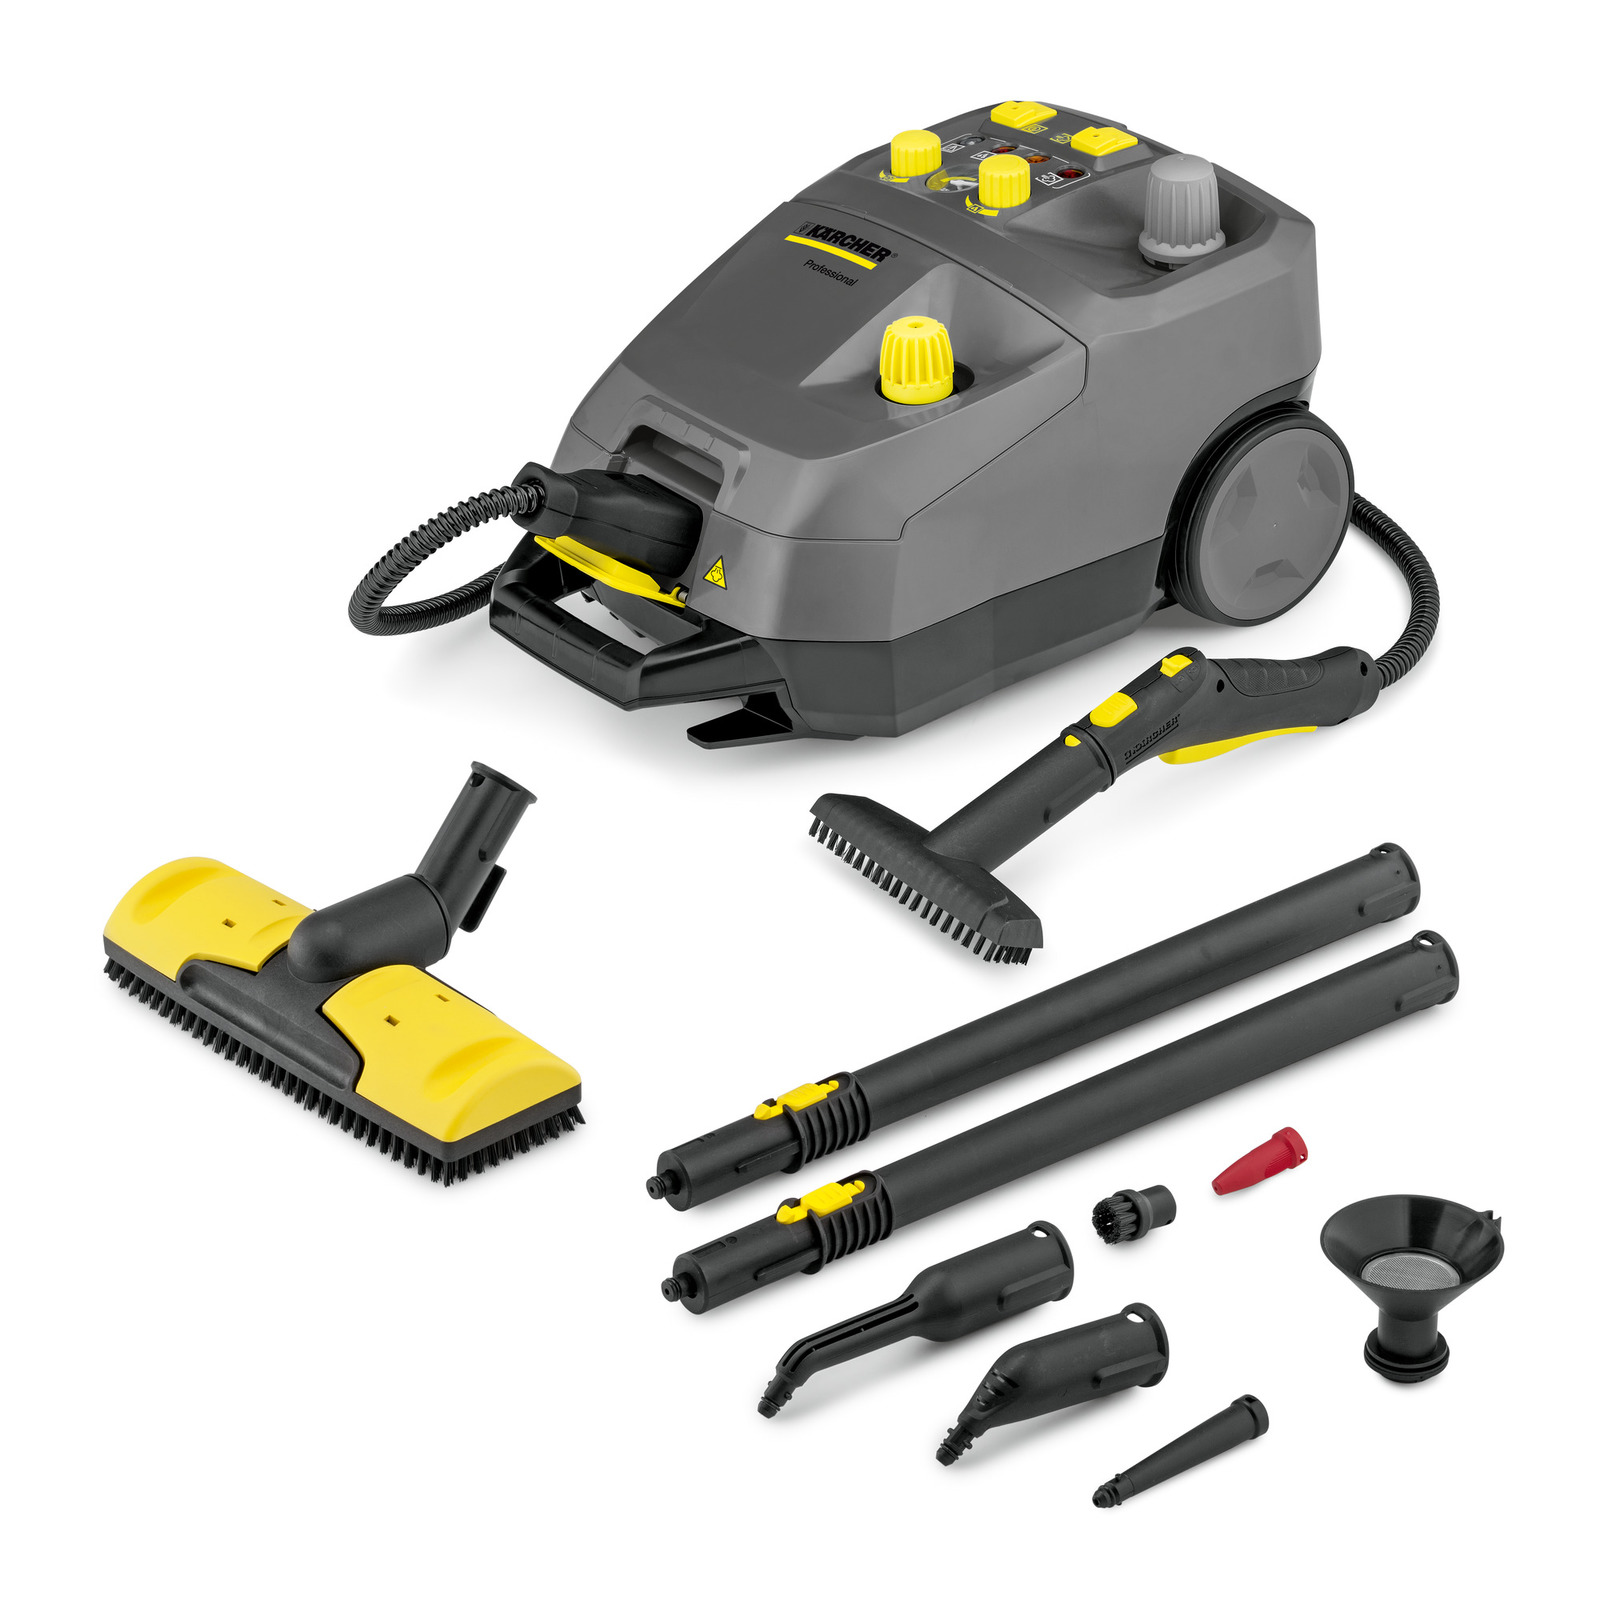 How to Use the Karcher SC 2 - North Star Equipment Rentals (SG)